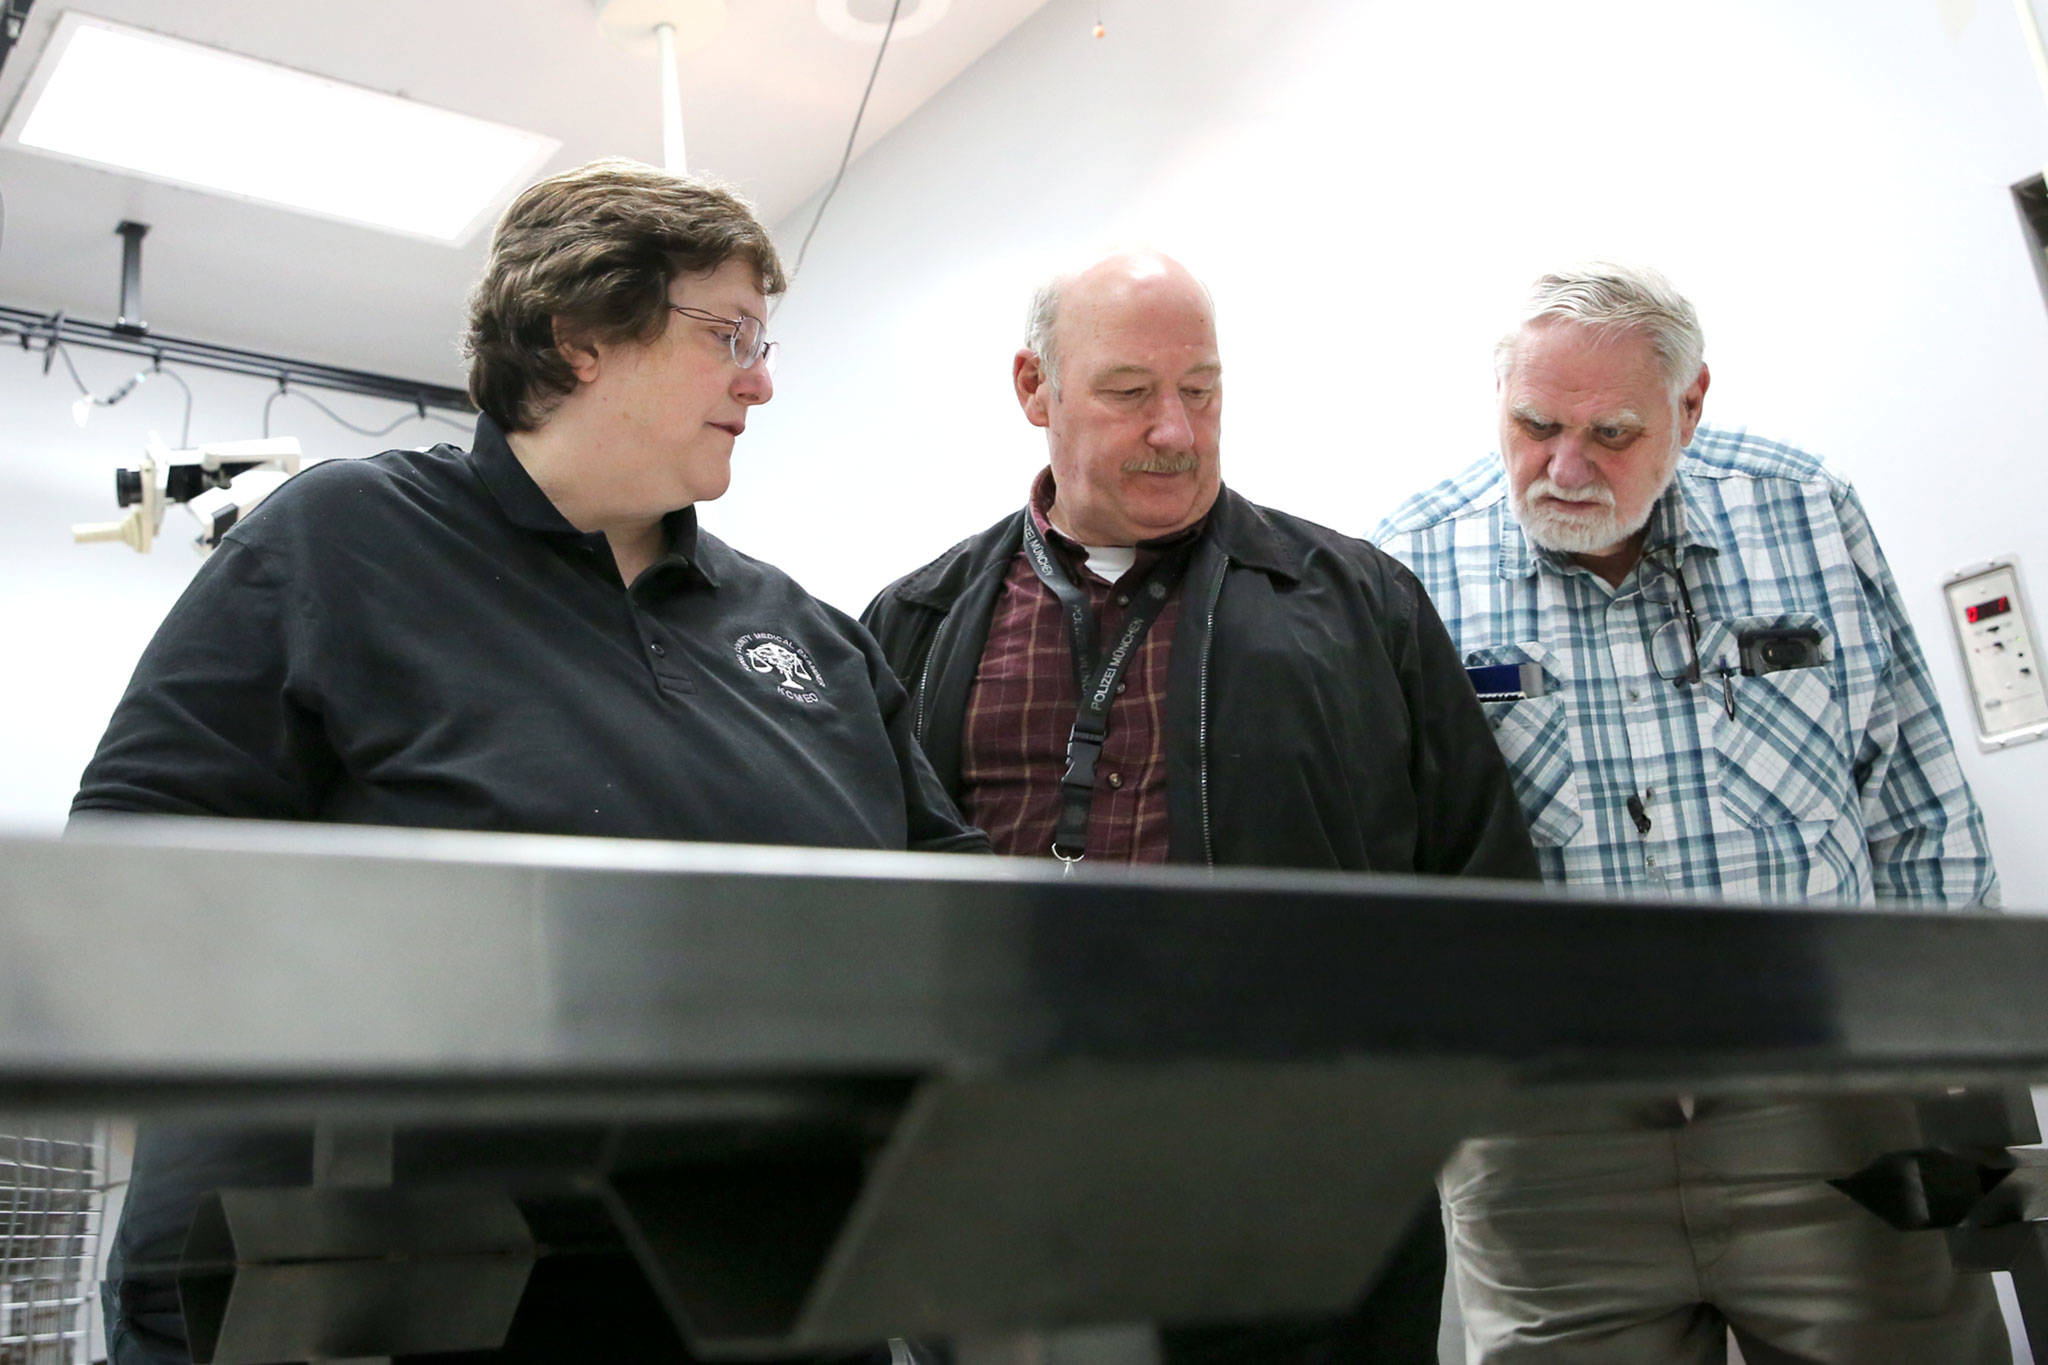 Kathy Taylor, a forensic anthropologist with the King County Medical Examiner’s Office (left), detective Jim Scharf of the Snohomish County Sheriff’s Office (center) and mental health professional Chuck Wright look over bones on a table Nov. 13, 2018, at the Snohomish County Medical Examiner’s Office. (Kevin Clark / Herald file)